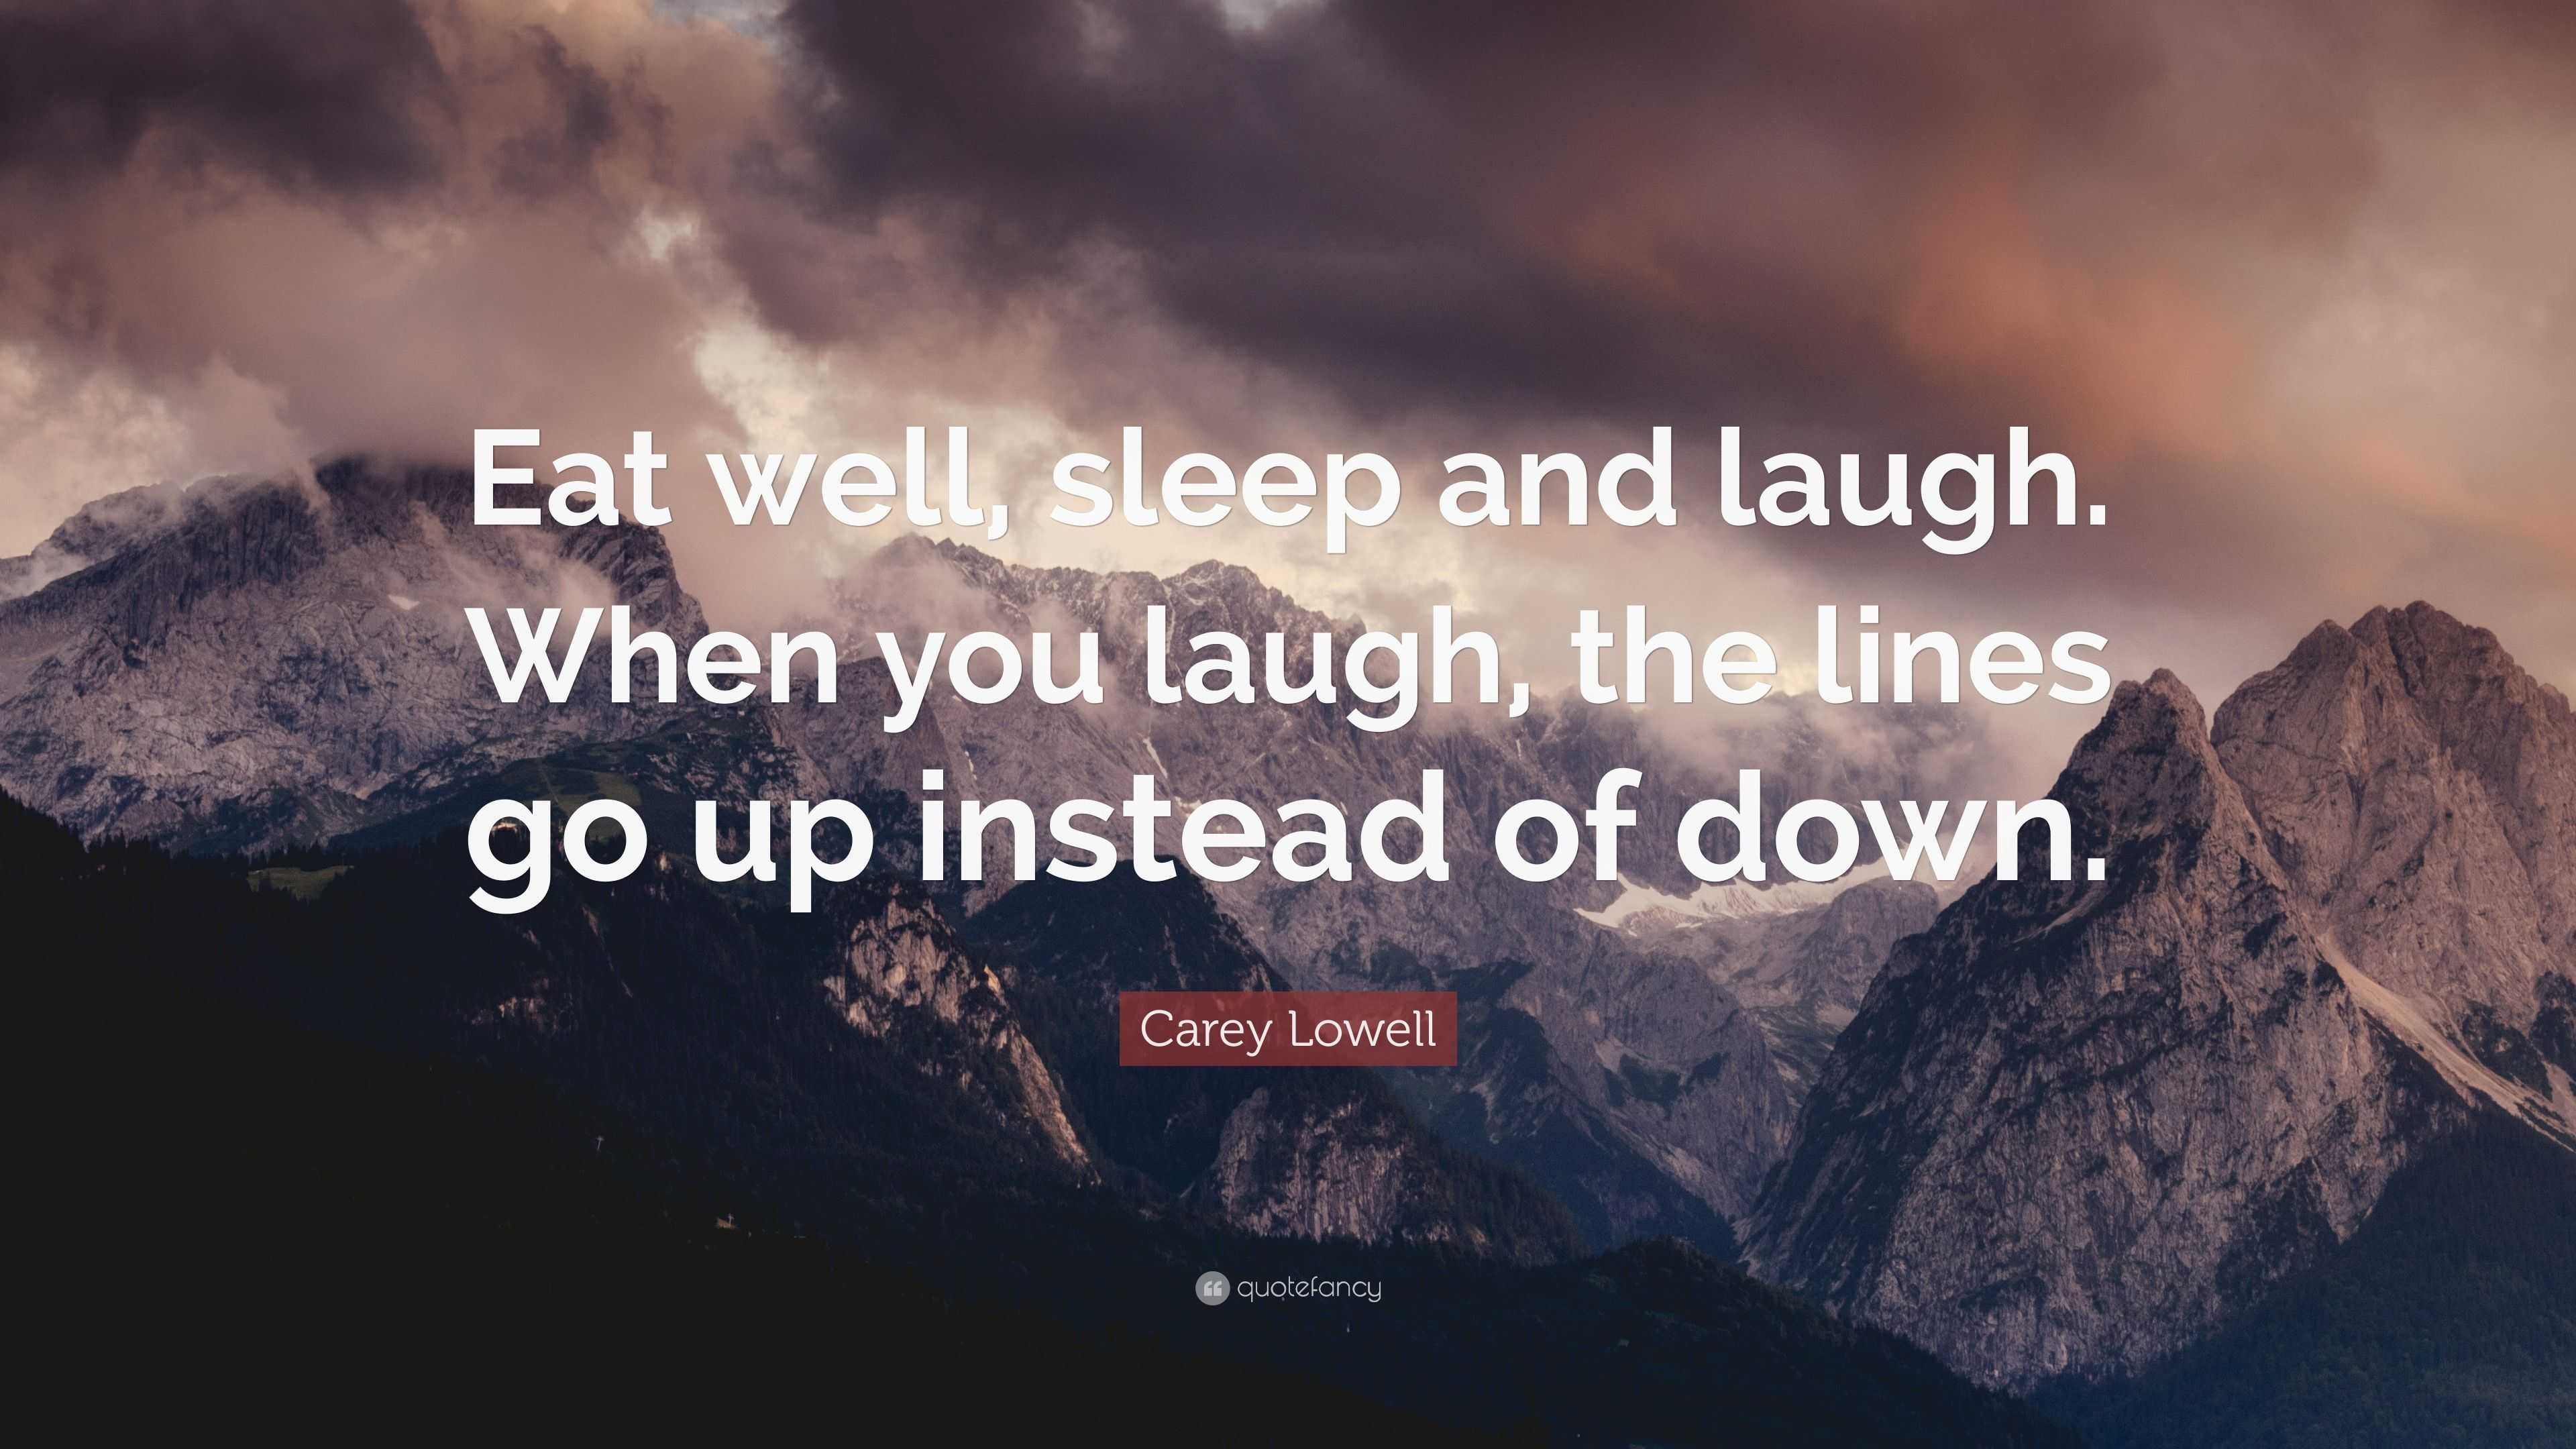 Carey Lowell Quote: “Eat well, sleep and laugh. When you laugh ...